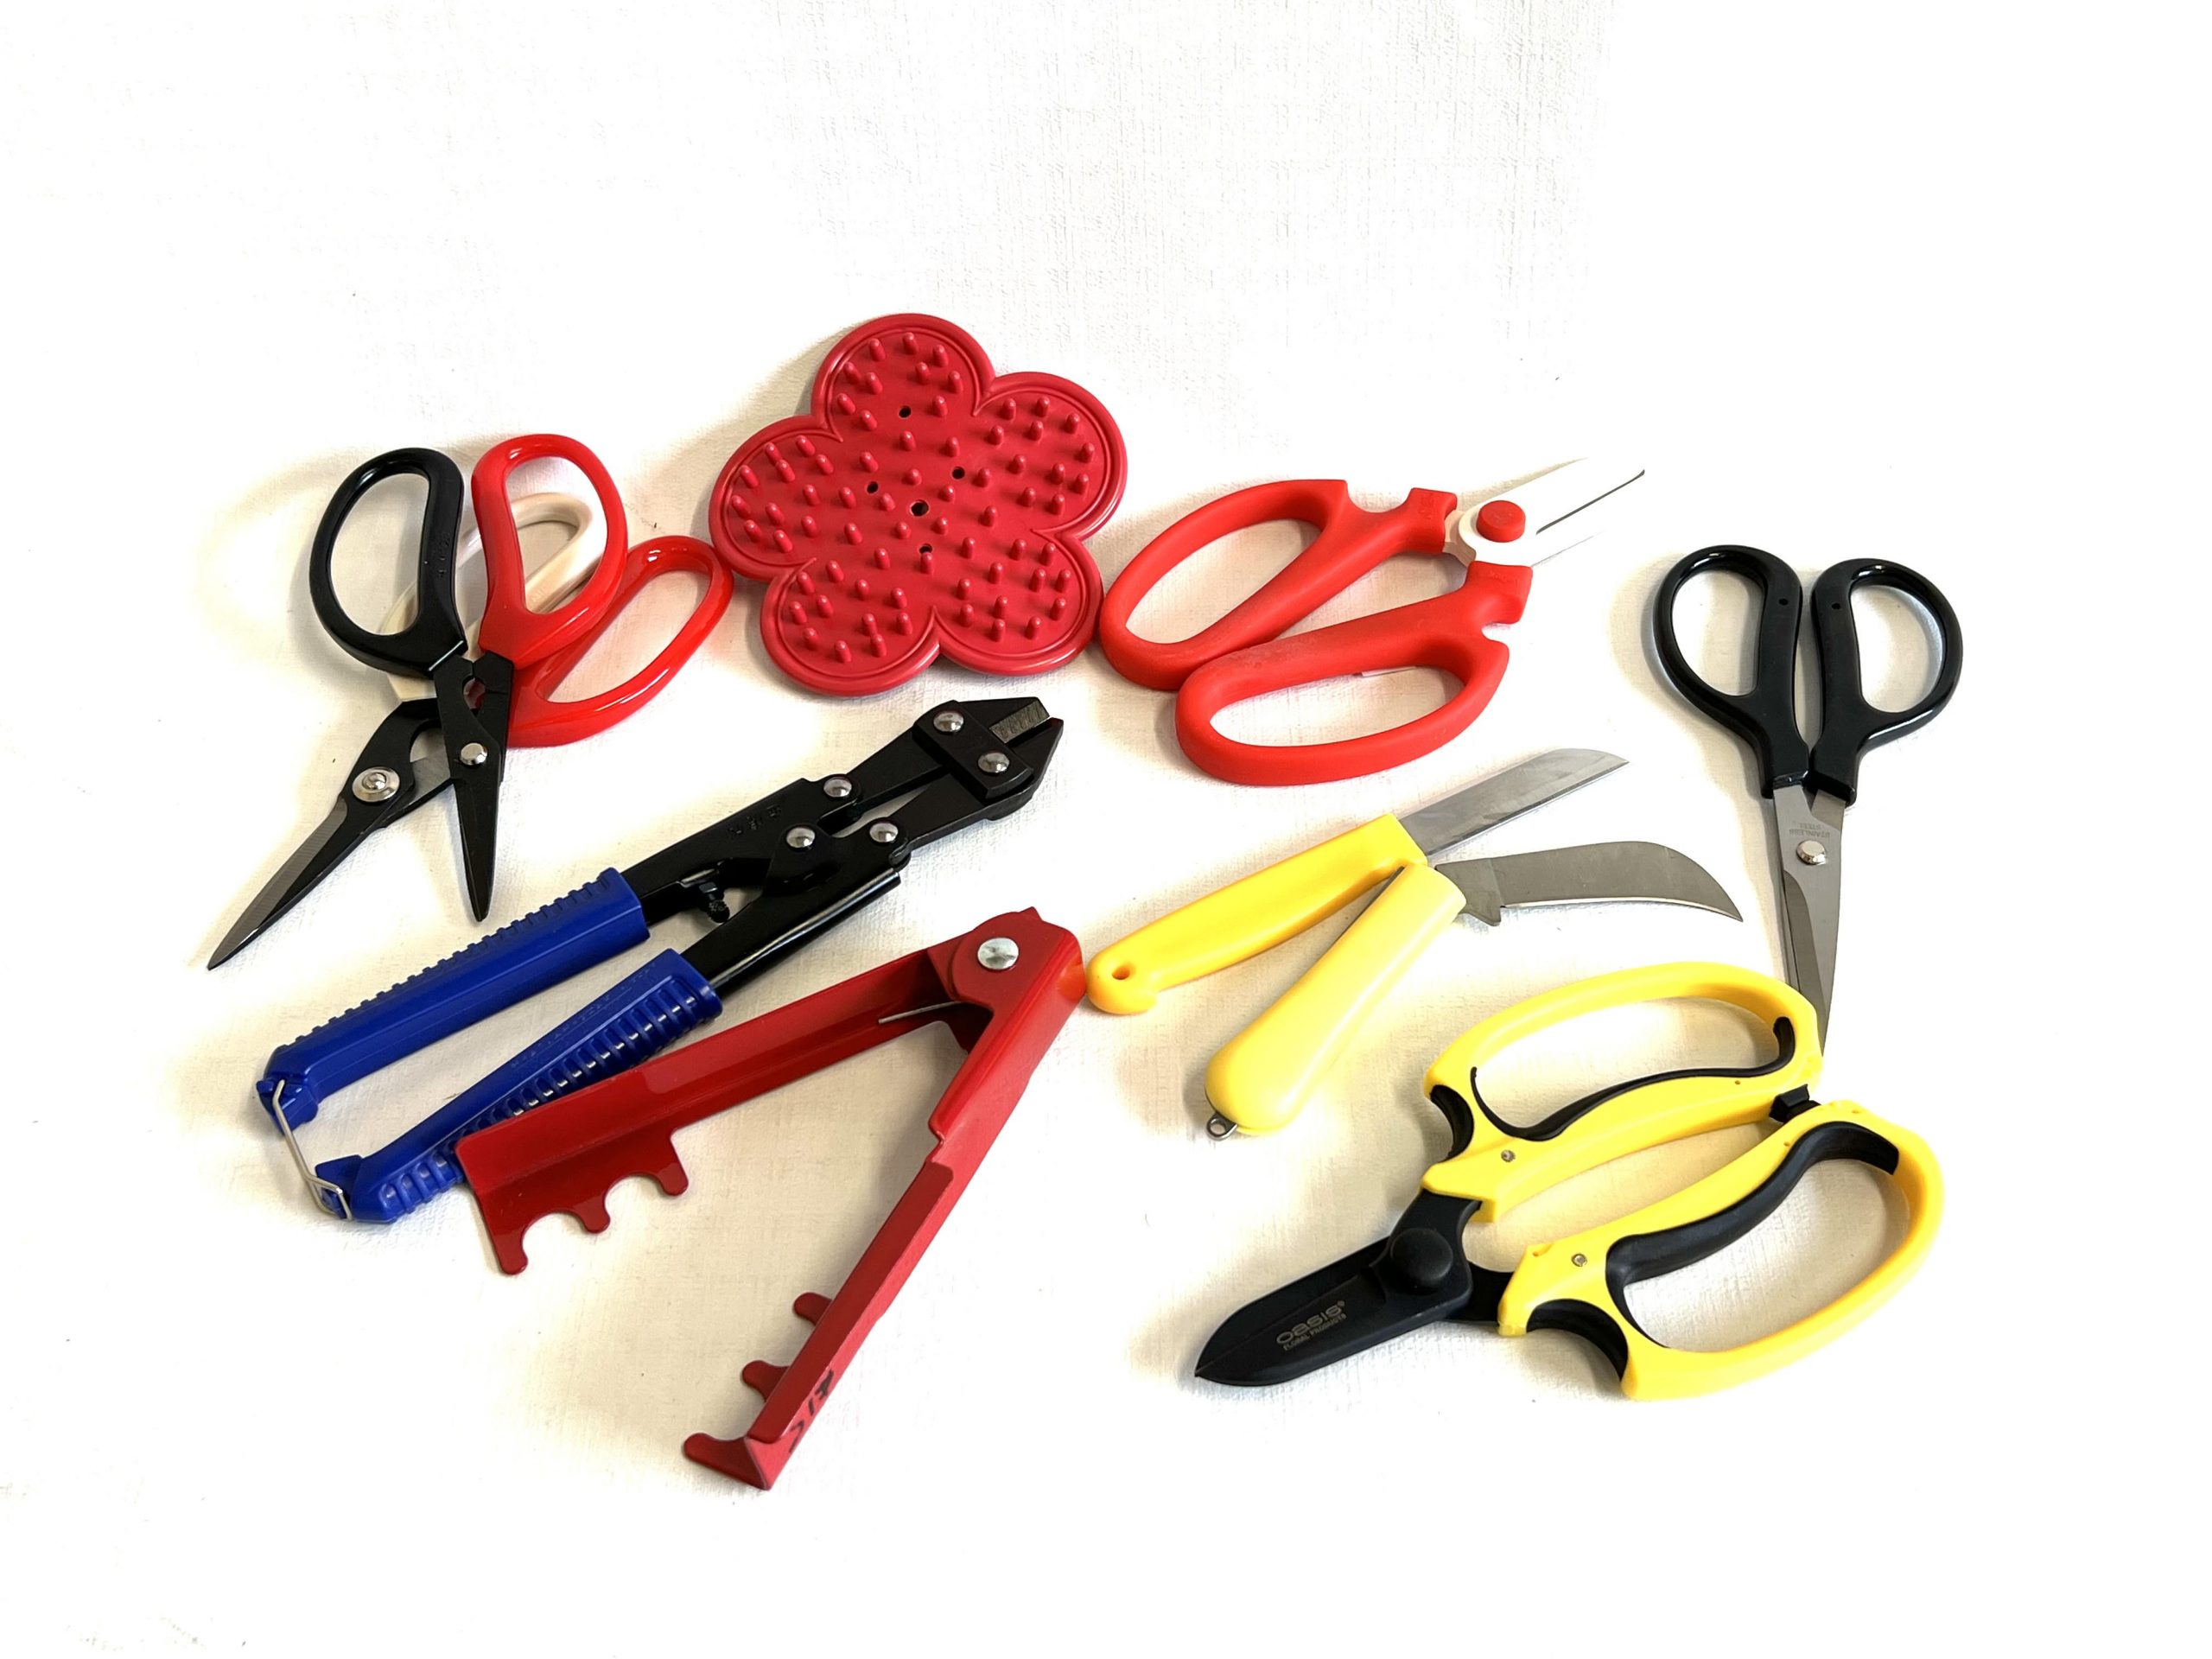 Tools For Floristry and Craft